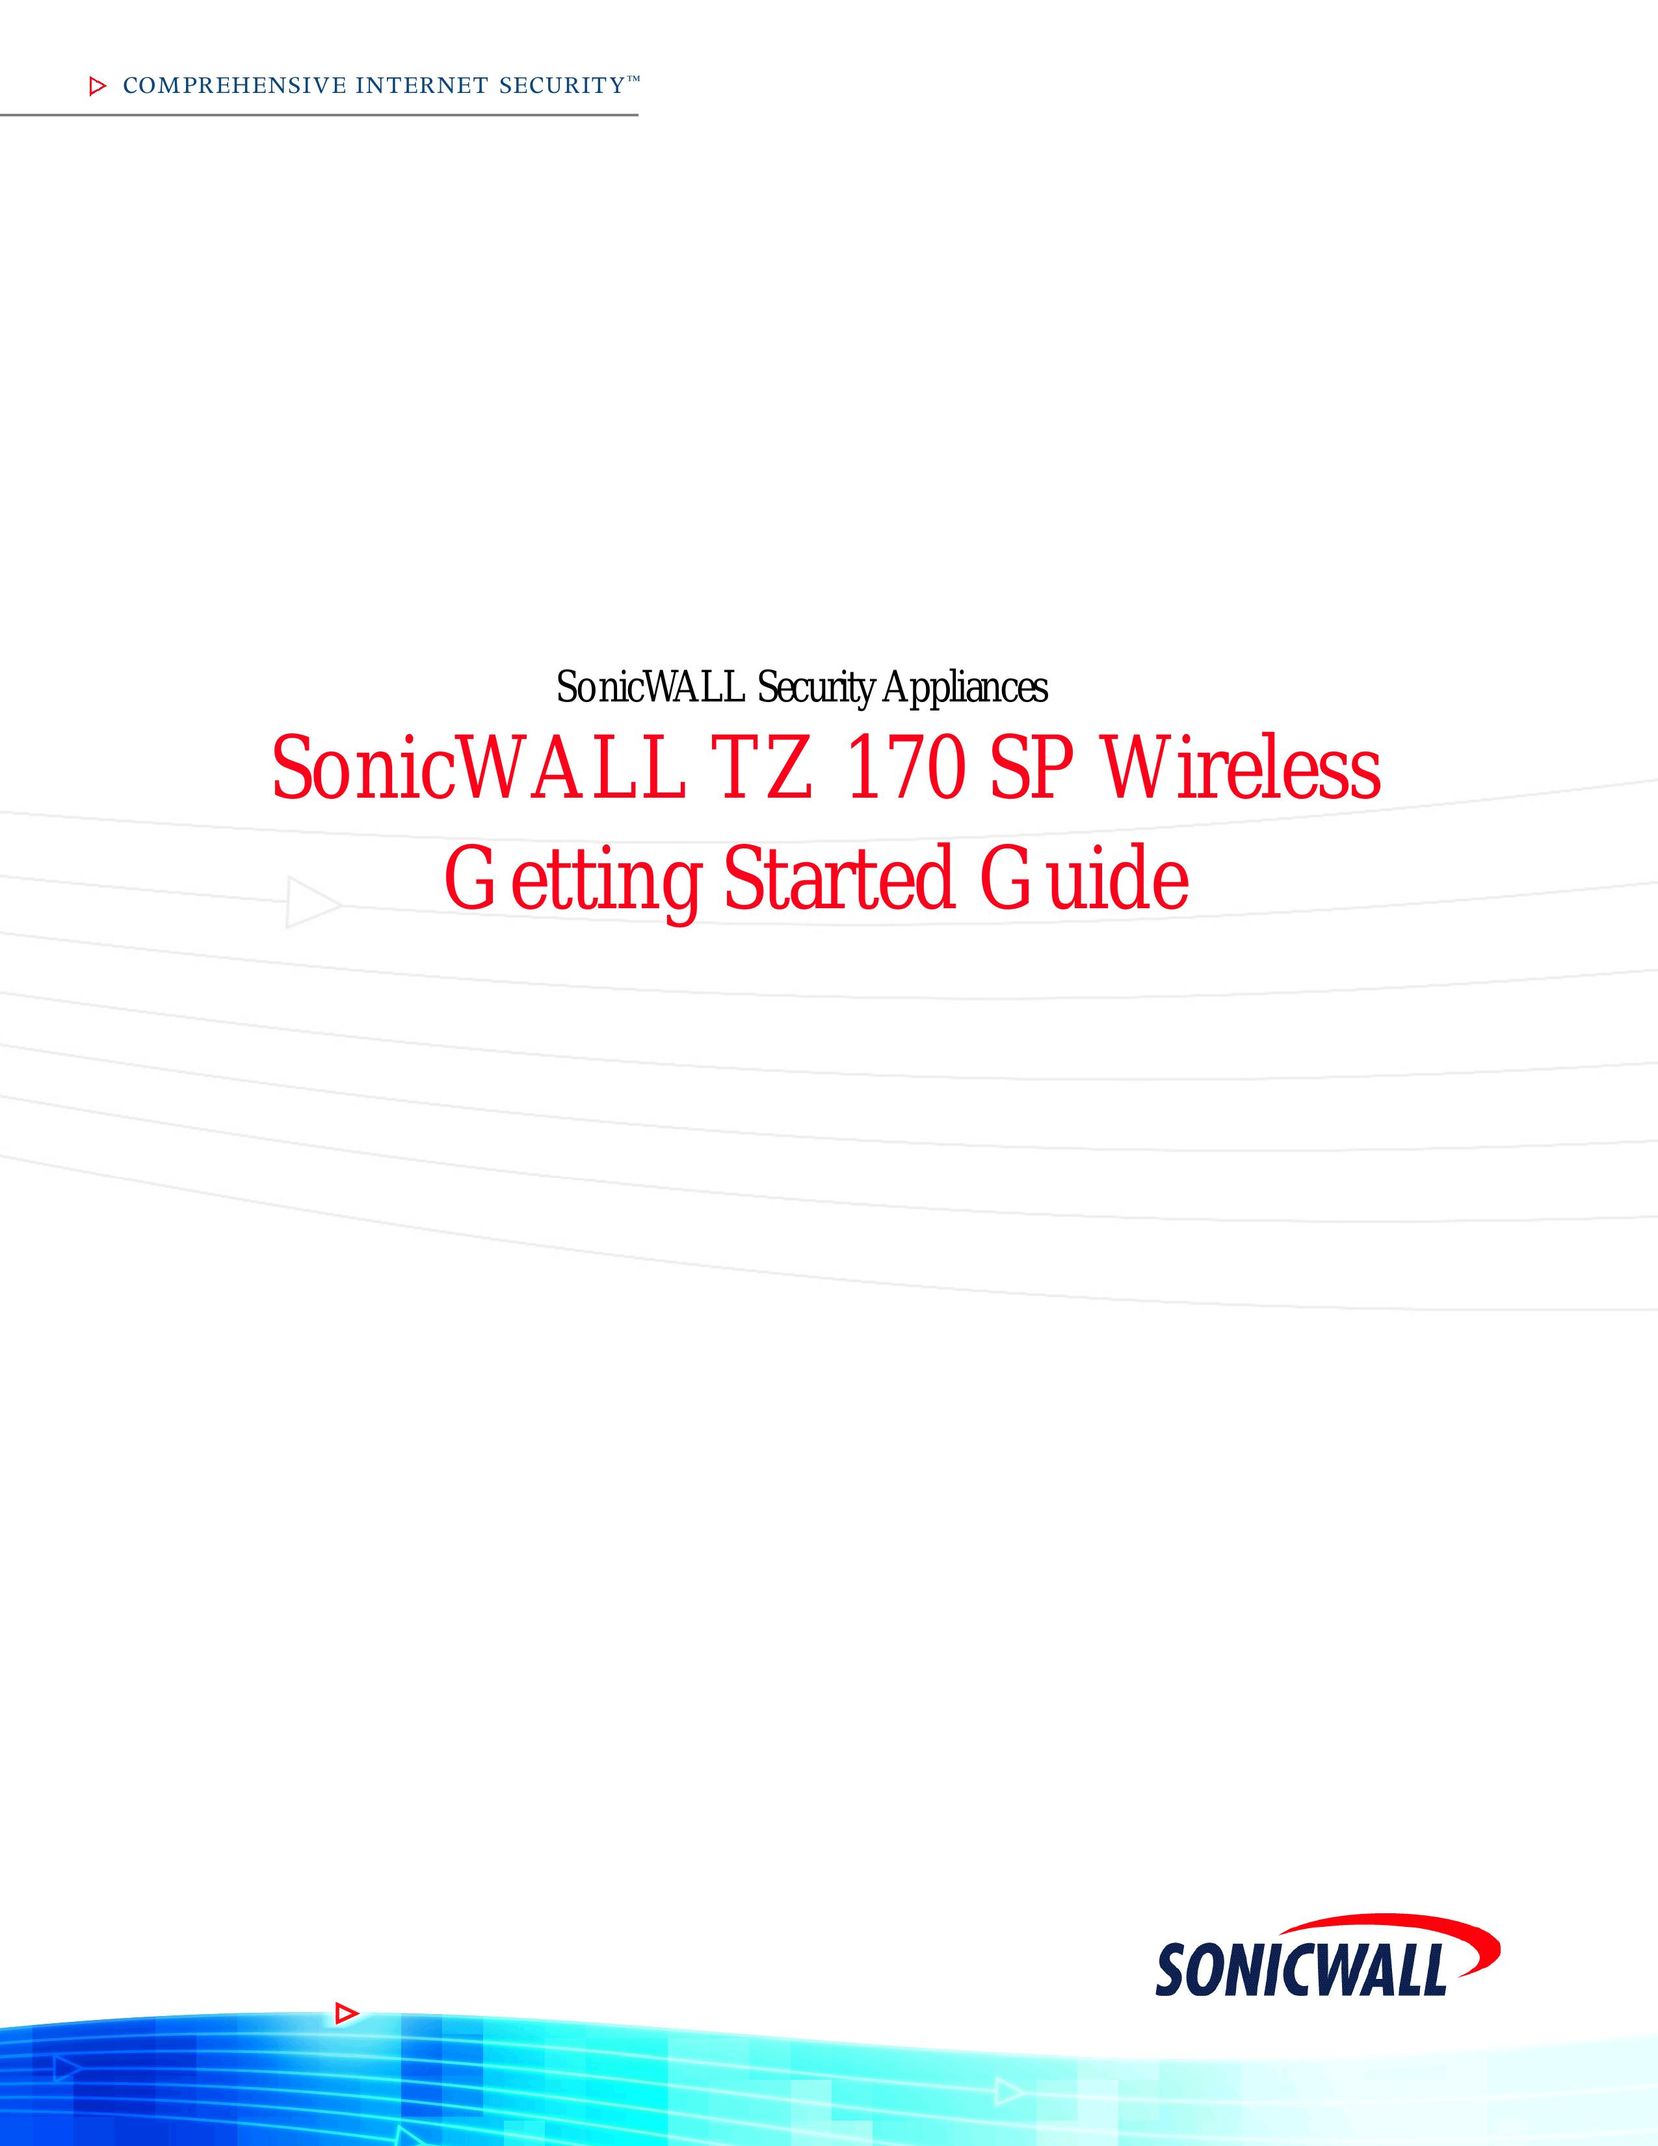 SonicWALL TZ 170 SP Home Security System User Manual